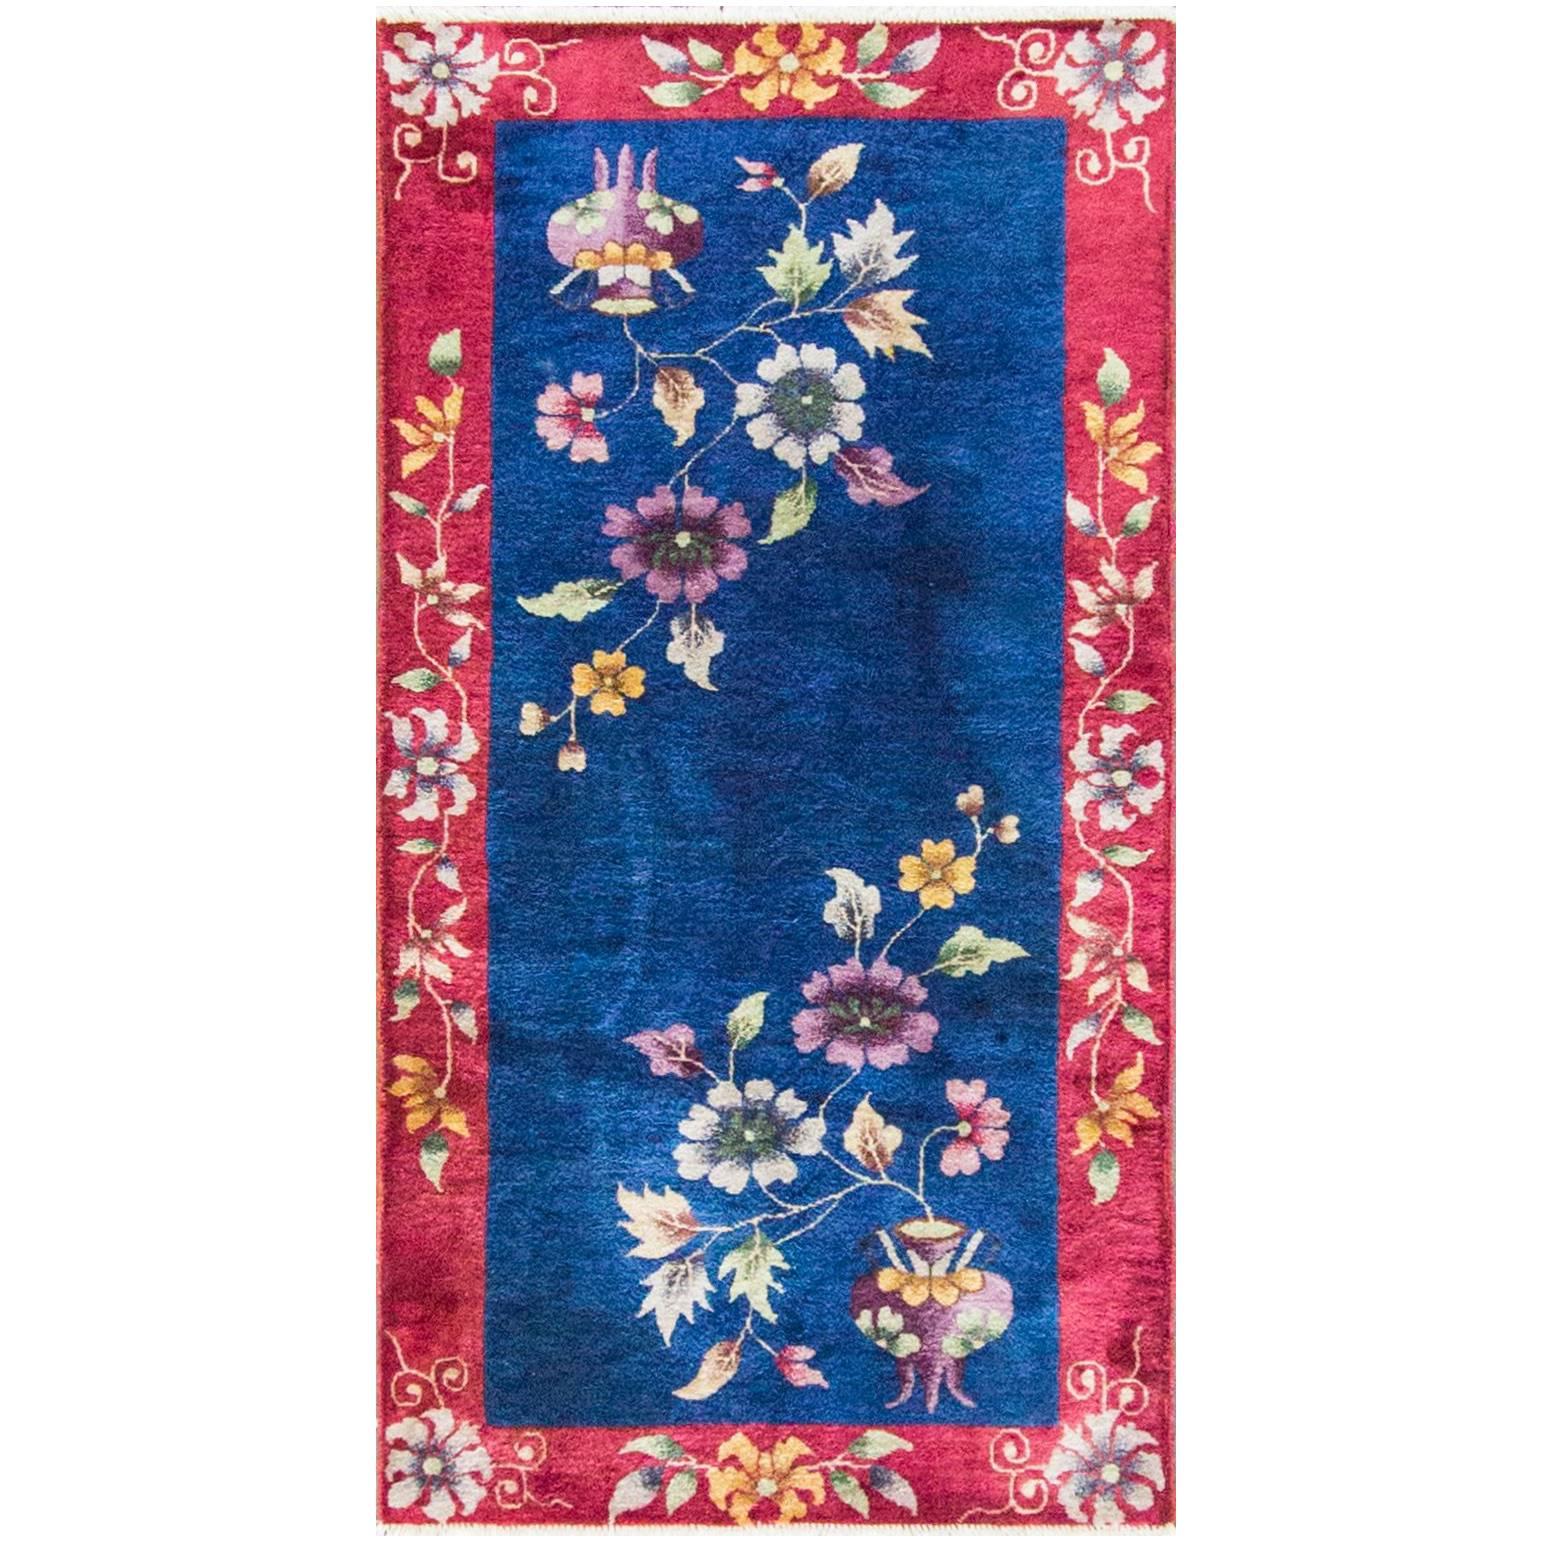  Antique Art Deco Chinese Rug For Sale